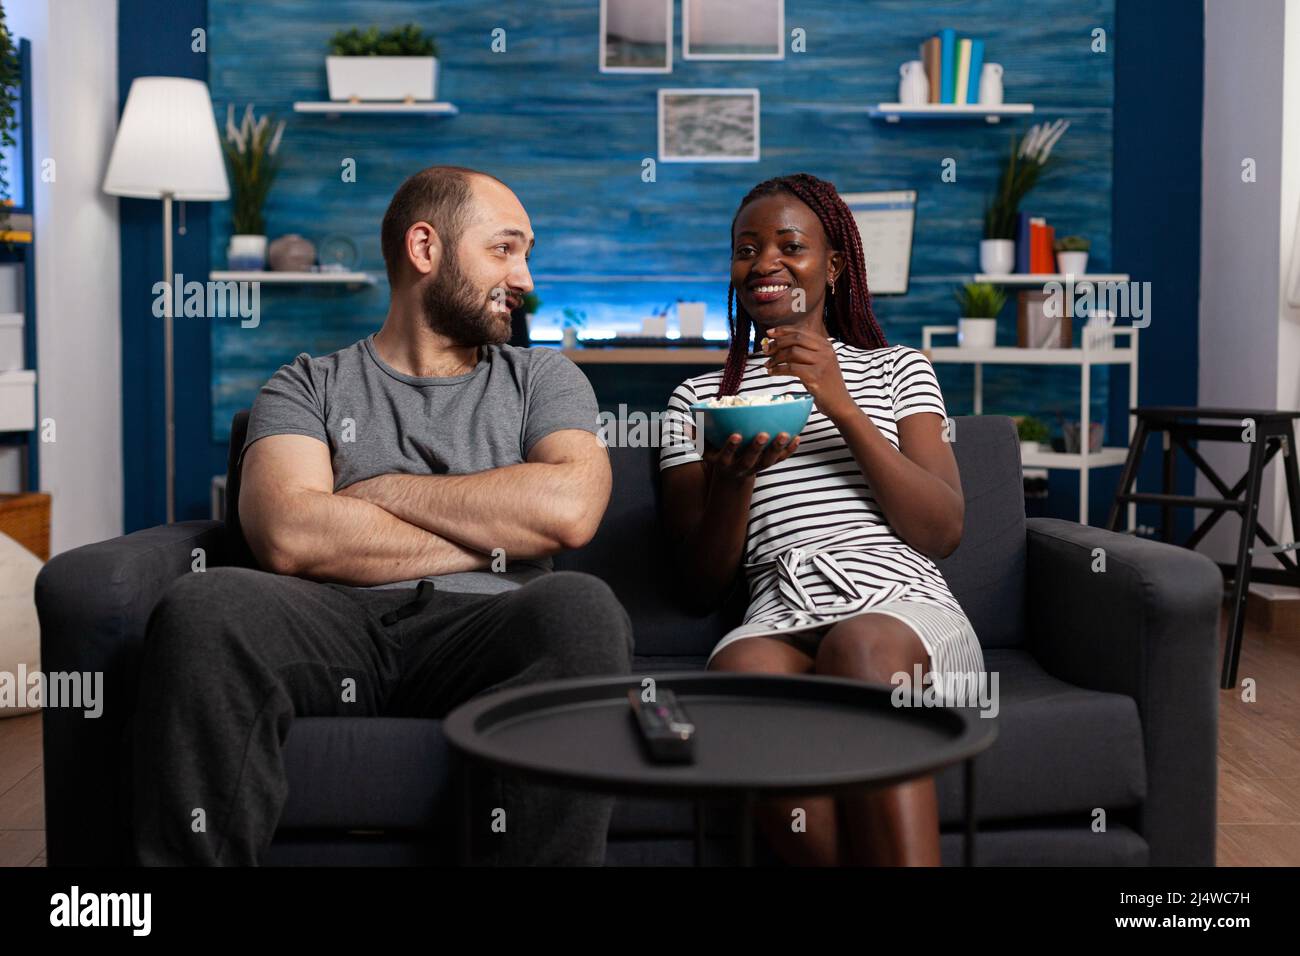 Happy interracial couple having a pleasent conversation while sitting on sofa at home. Relaxed man and woman bonding and having a good time in the living room while sharing snacks Stock Photo